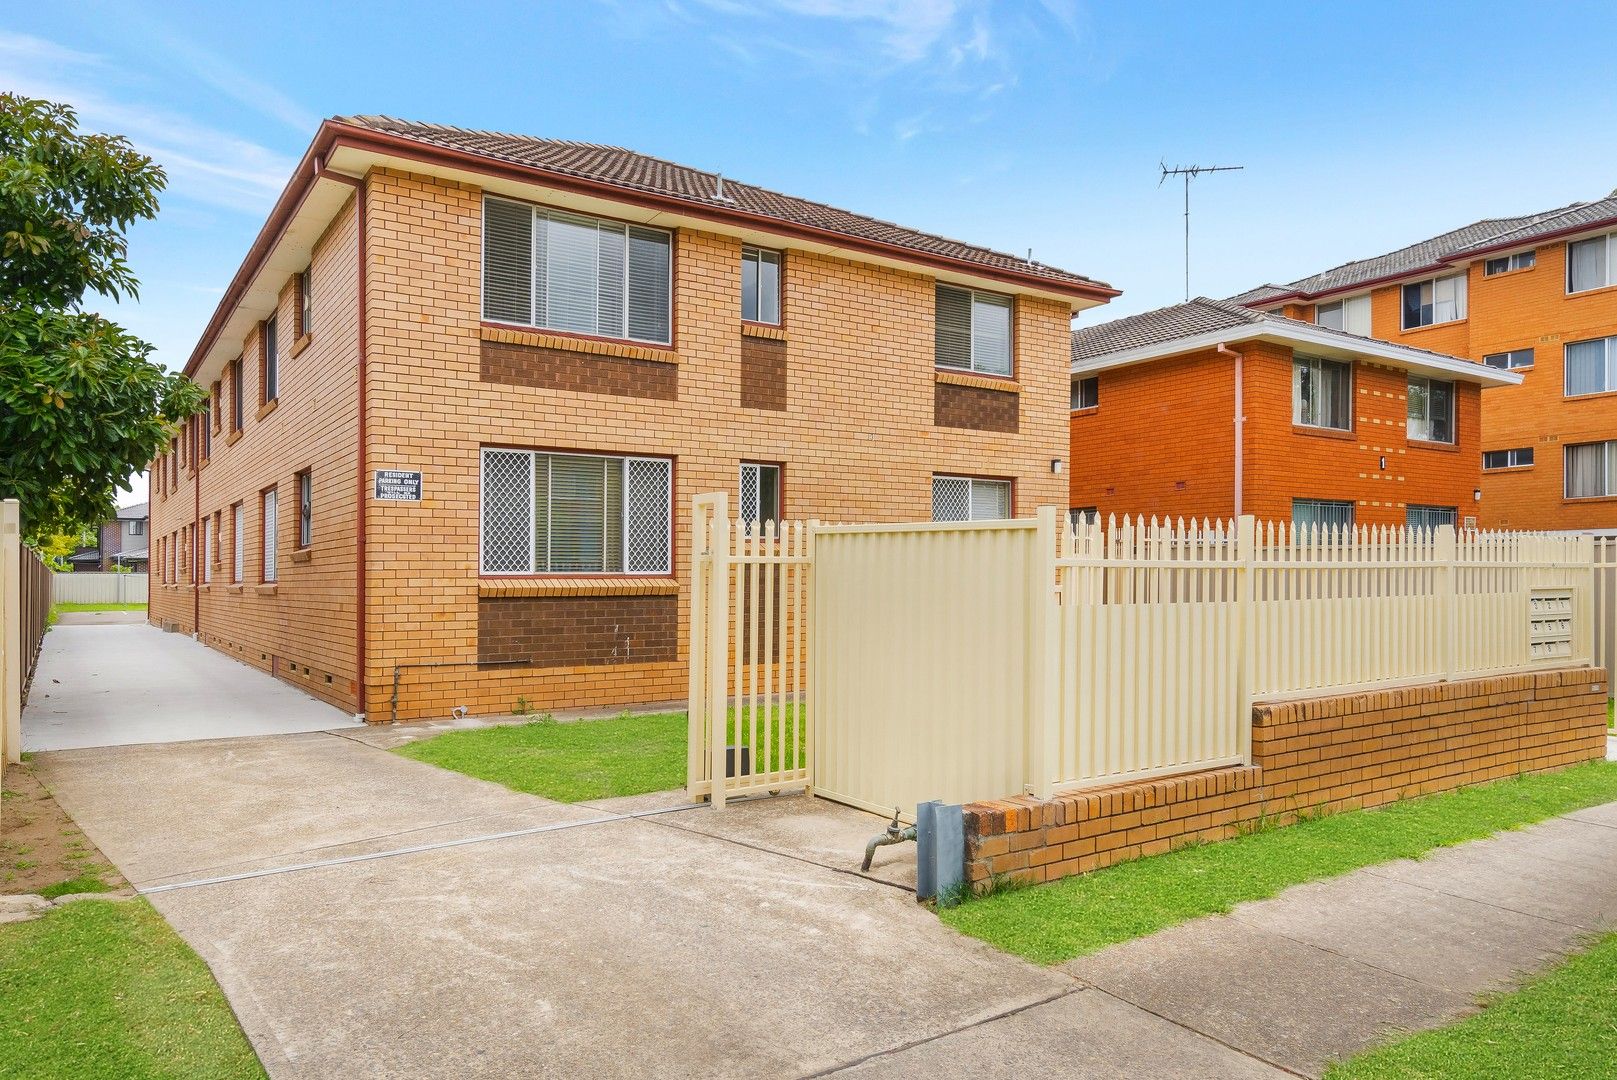 2 bedrooms House in 3/3 Clifford Avenue CANLEY VALE NSW, 2166